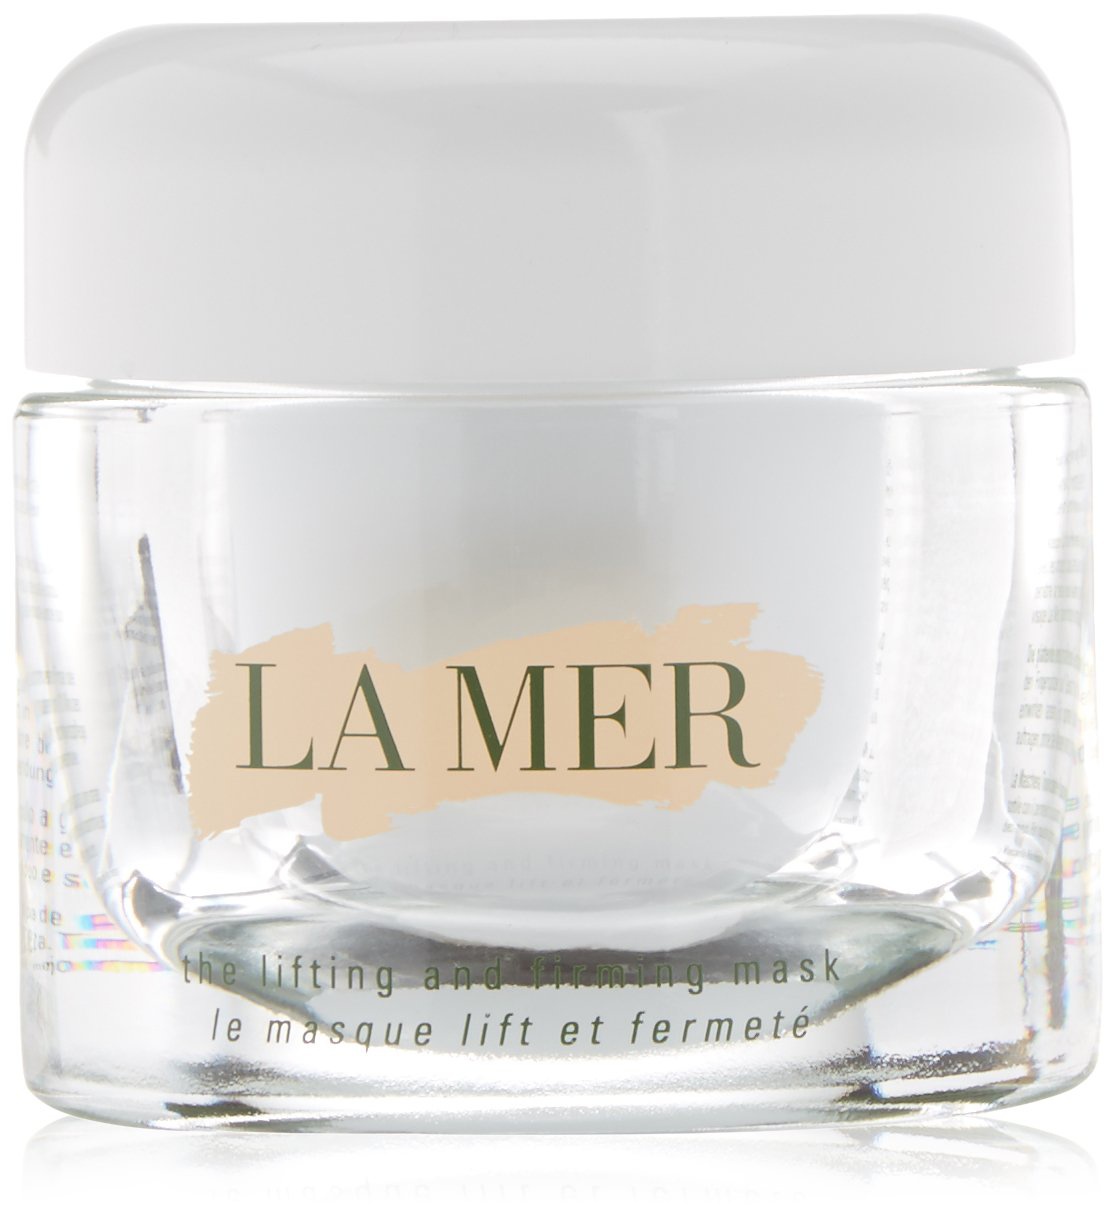 La Mer The Lifting And Firming Mask